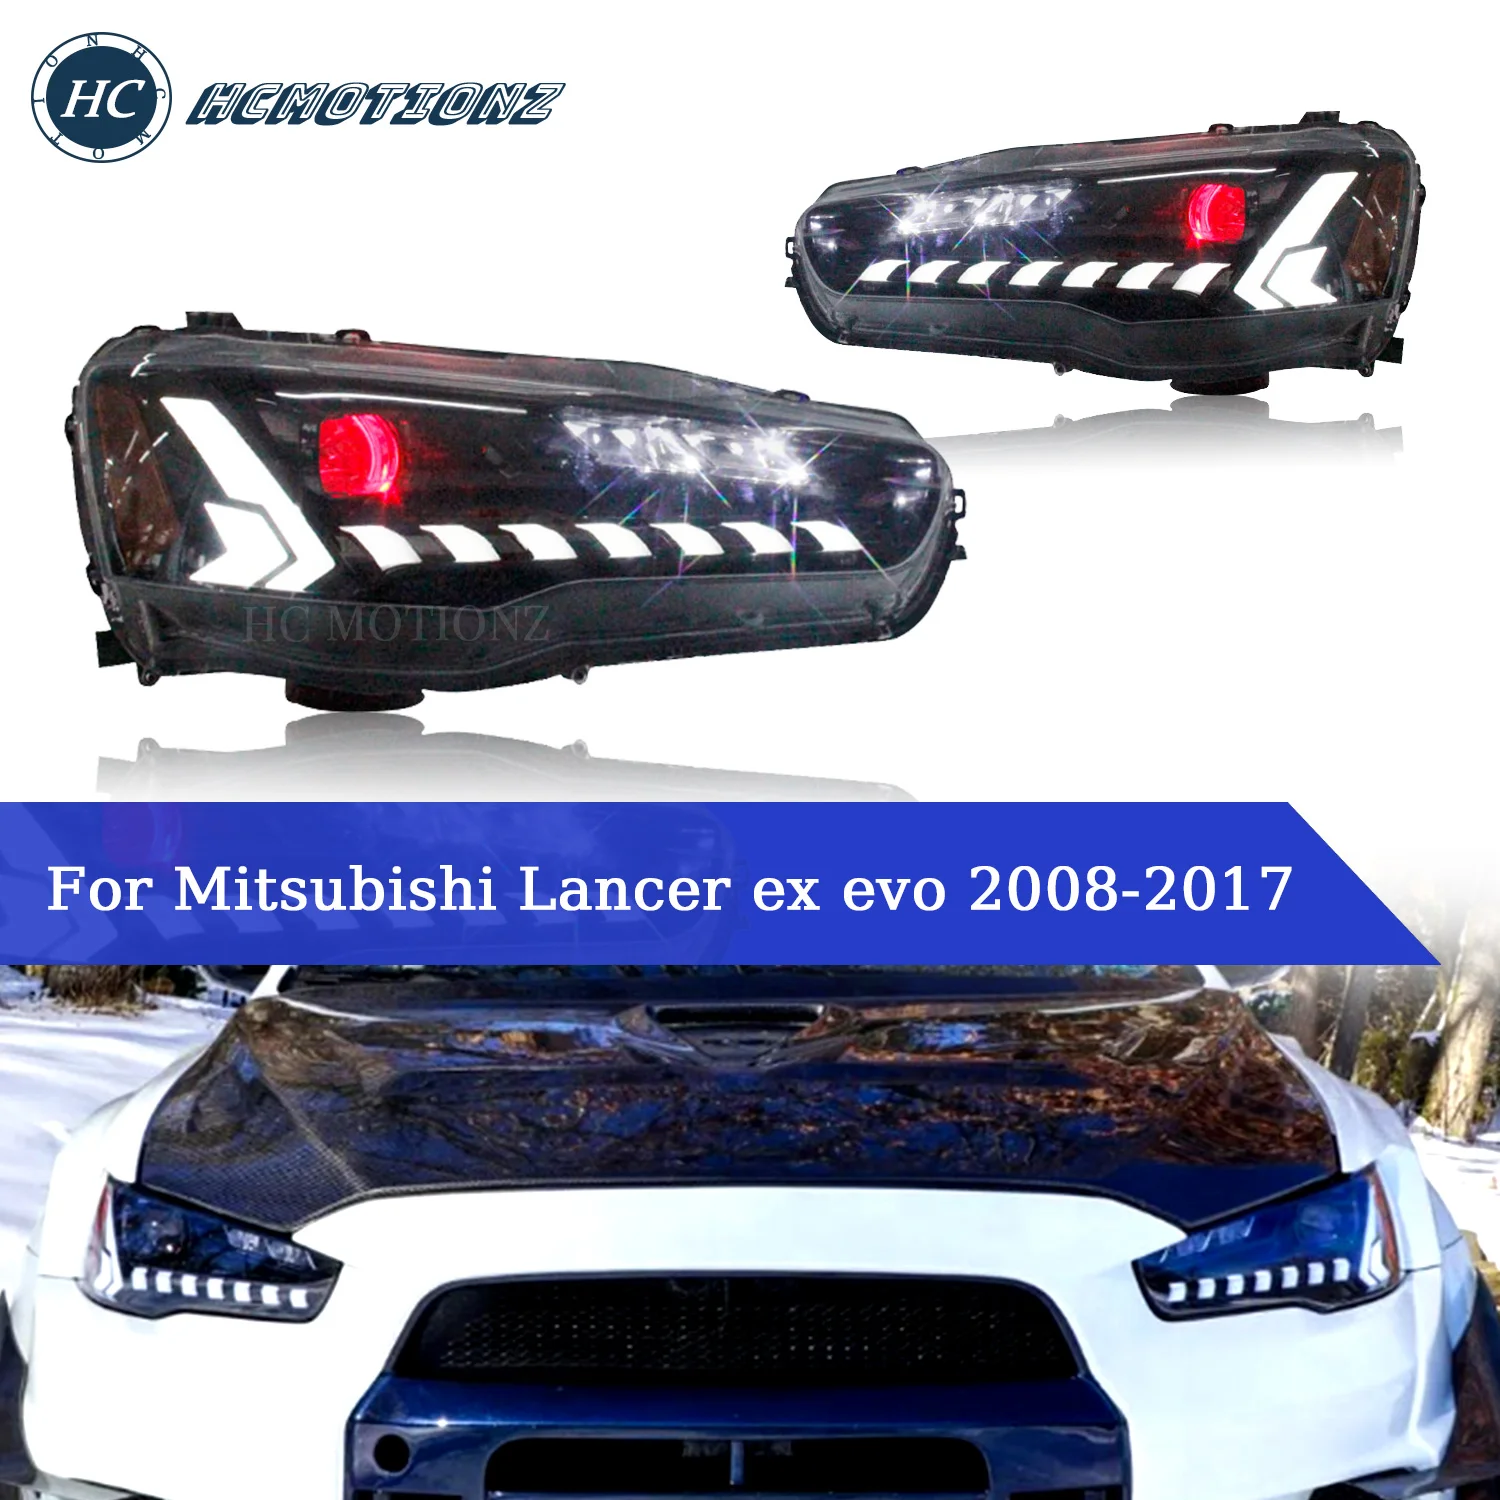 

HCMOTIONZ LED Headlights Assembly Fit for Mitsubishi Lancer & EVO X 2008 - 2017 Head Lamps With LED DRL Start UP Animation